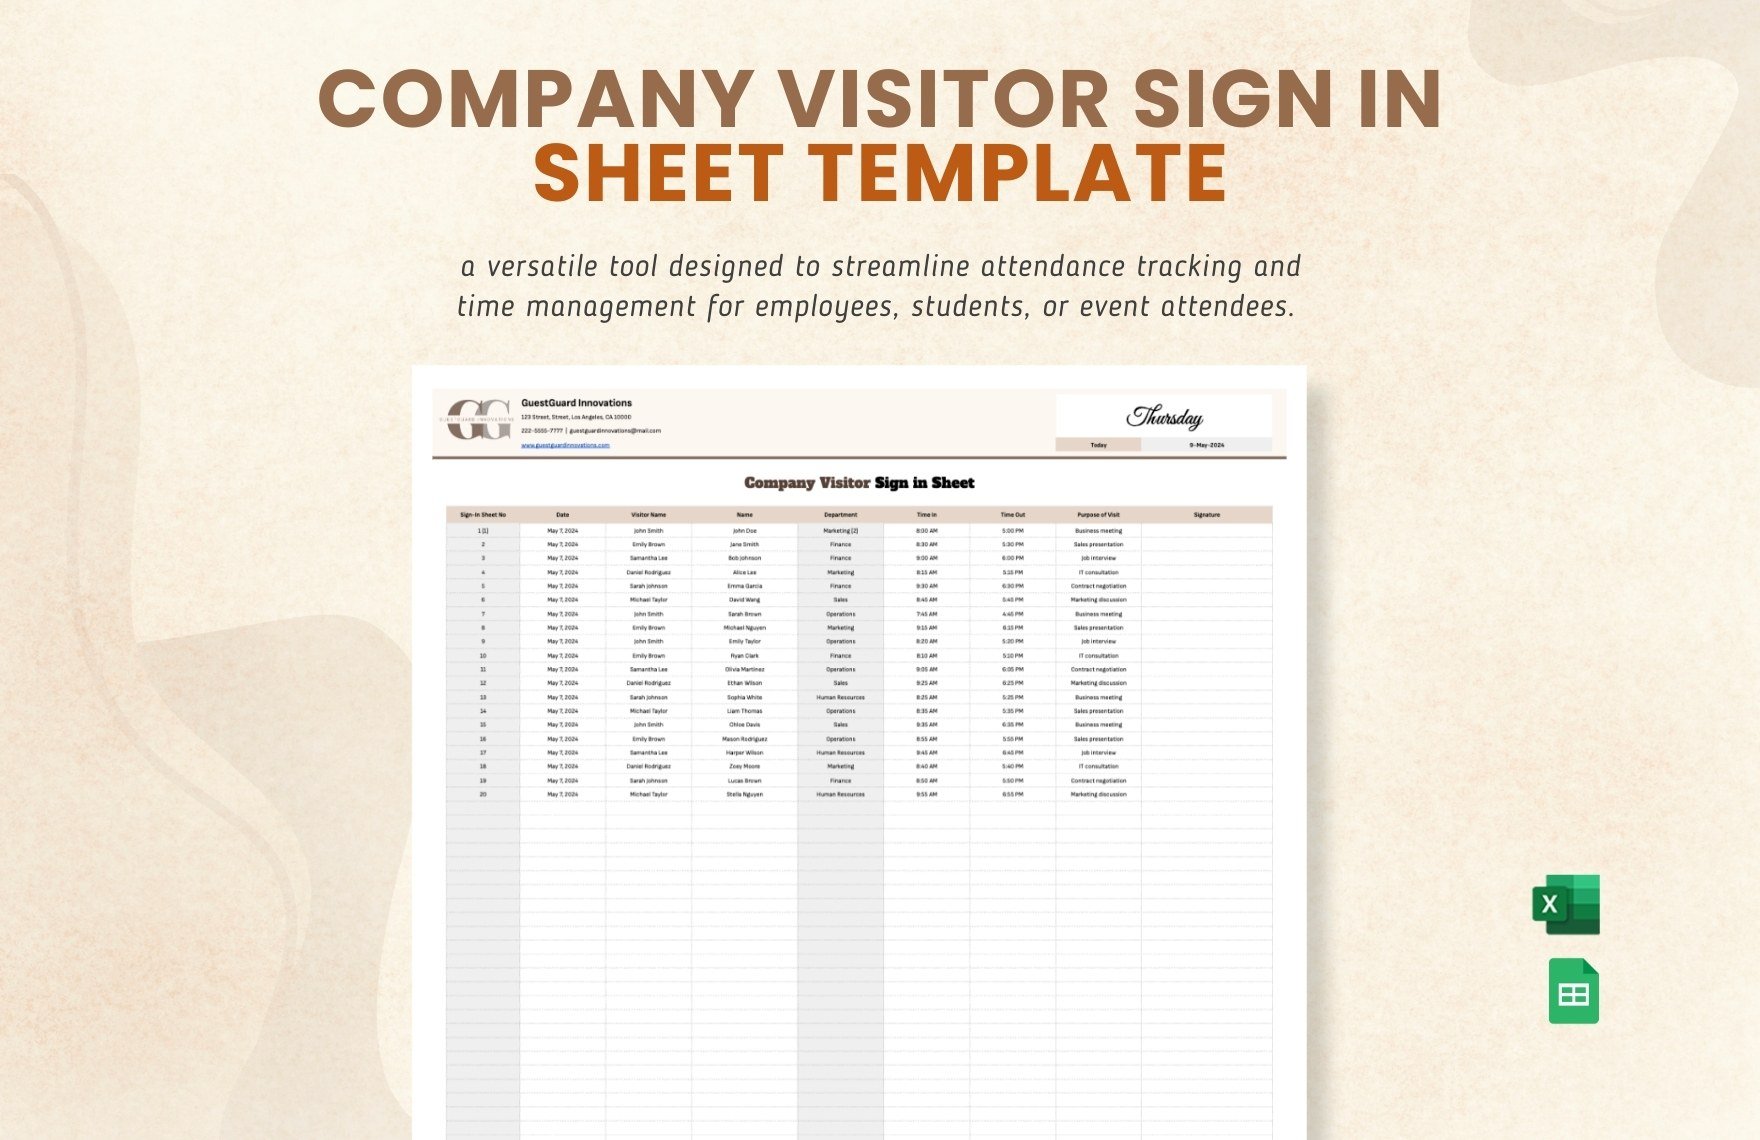 Company Visitor Sign in Sheet Template